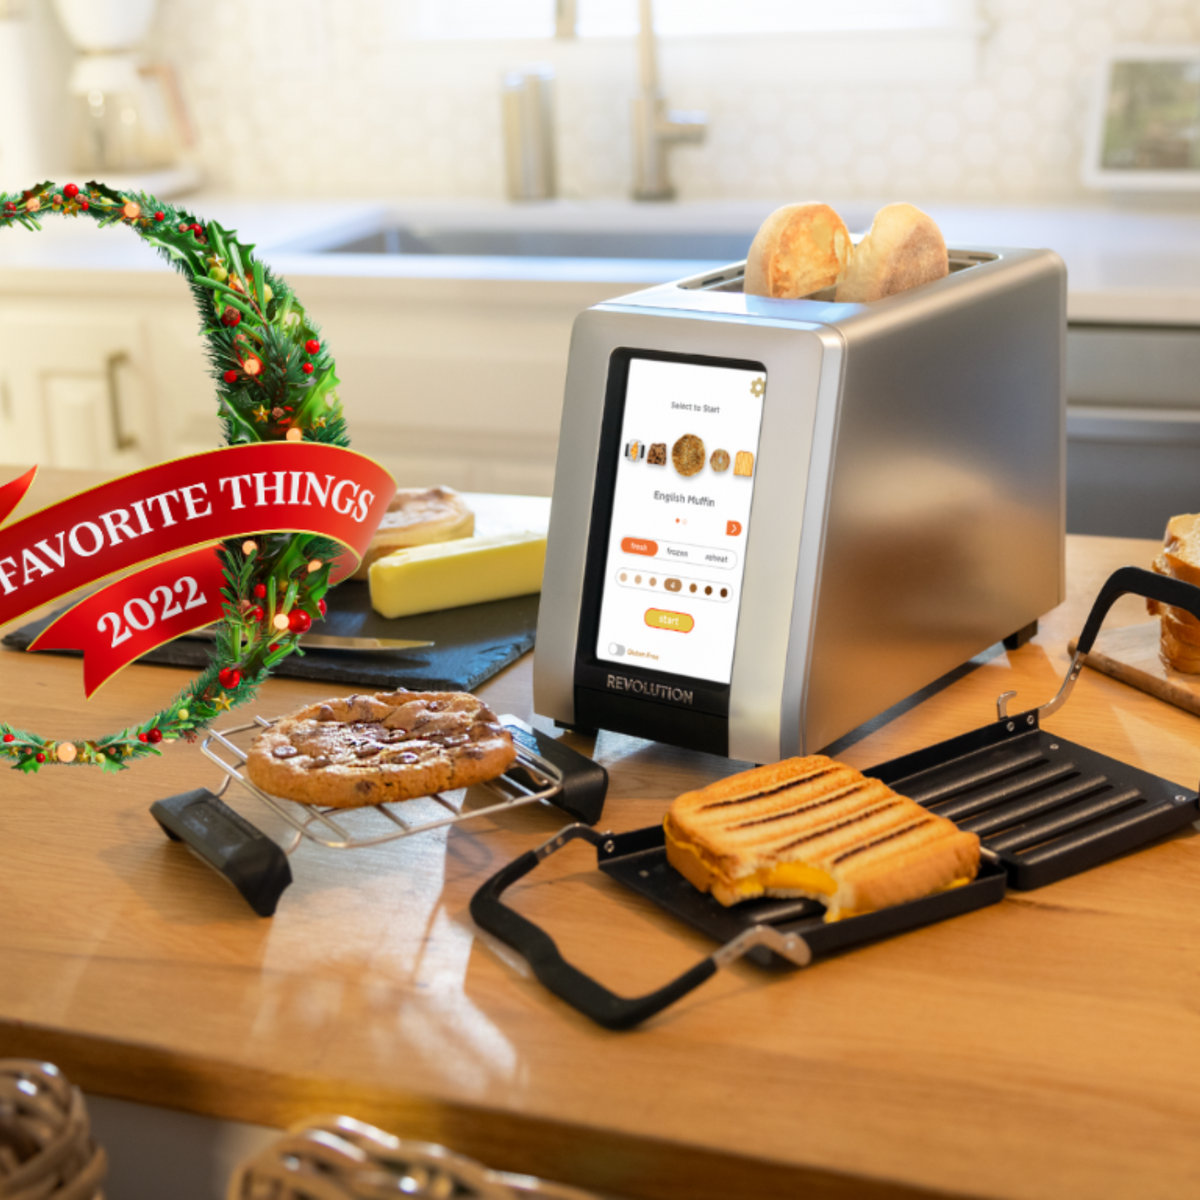 Tovala Sale: The Oven On Oprah's Favorite Things List Is Now $99